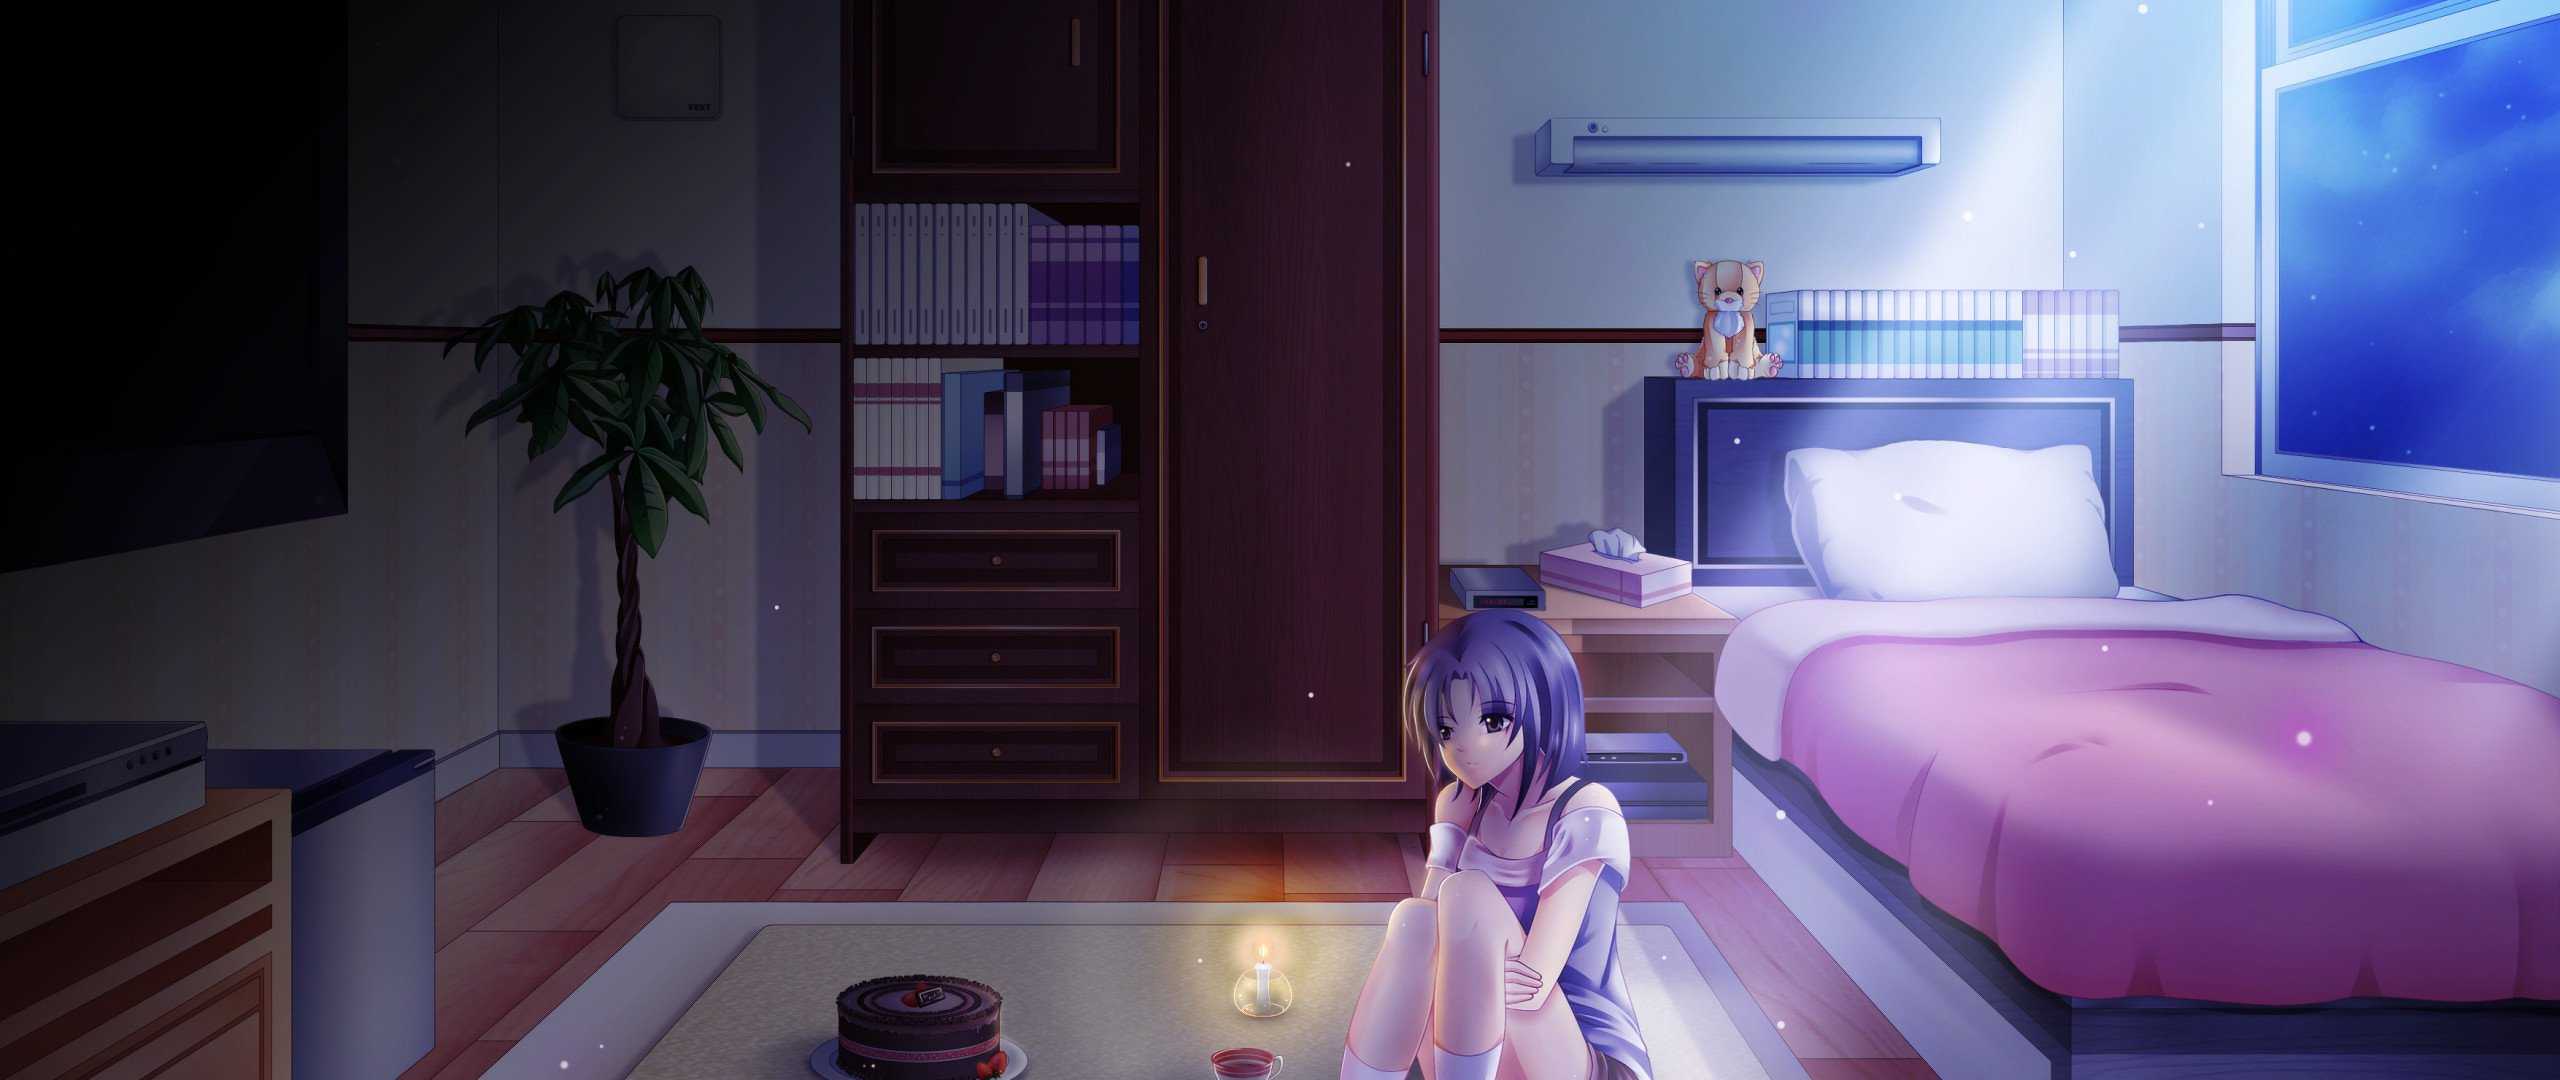 Anime Girl Alone in Room on Her Birthday HD Wallpaper (2560x1080)